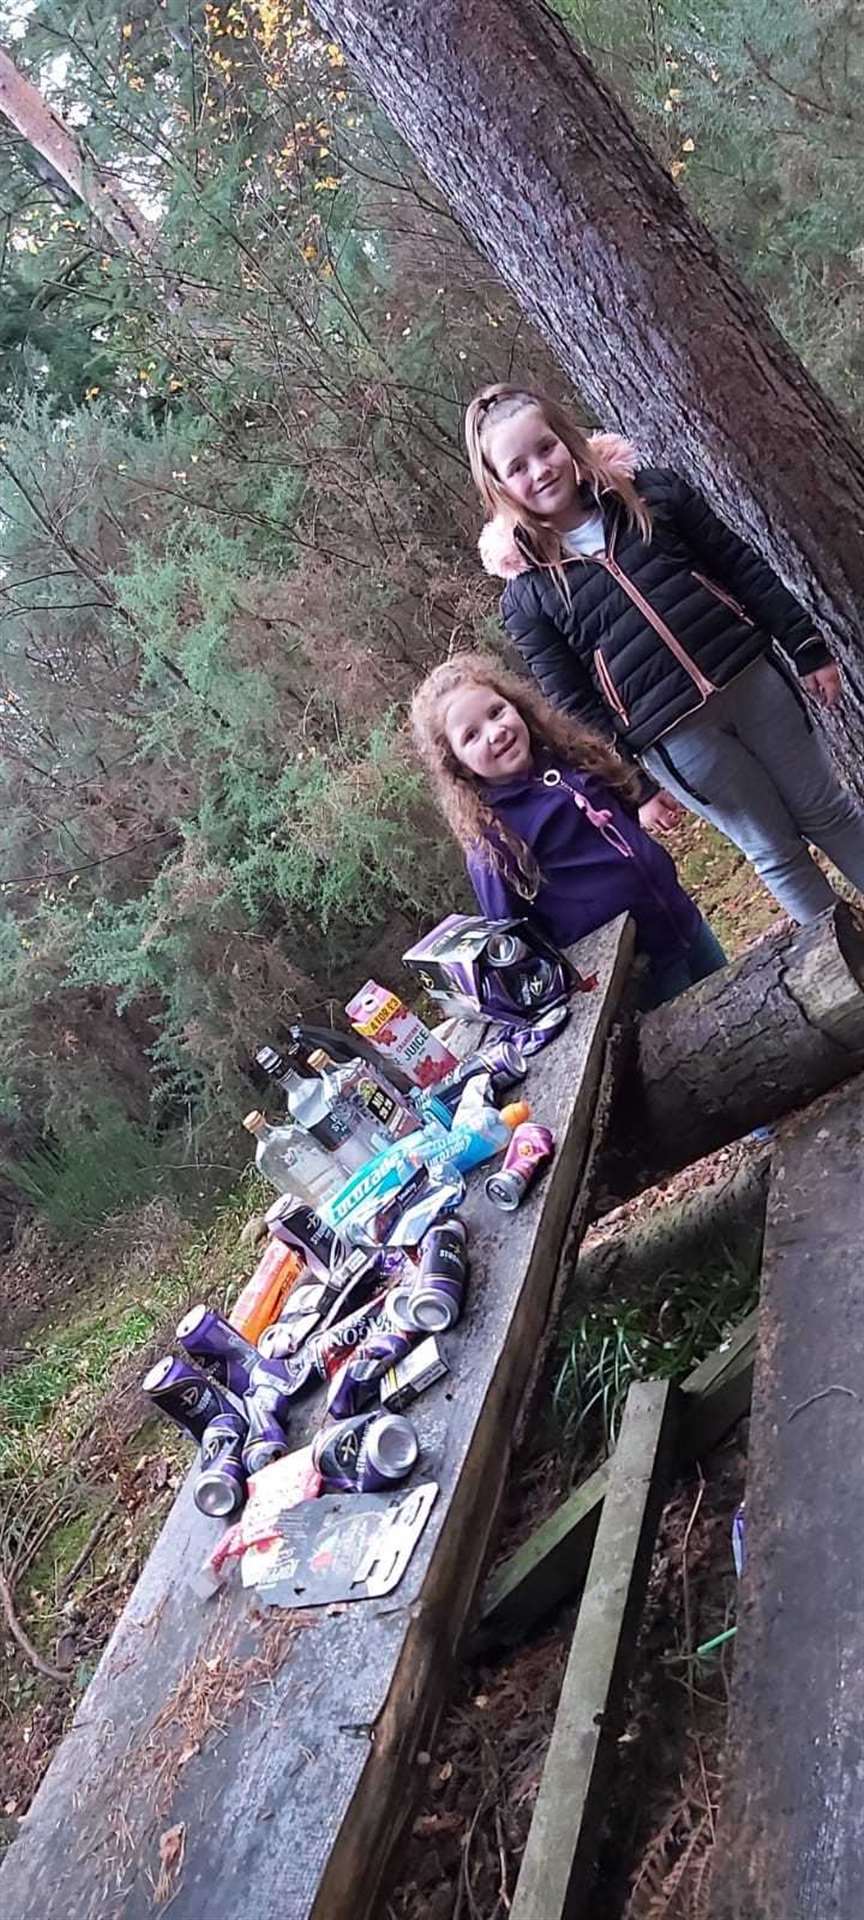 Lexi and Lola at the Sanquhar hut picnic table littered with empty booze bottles and cans.